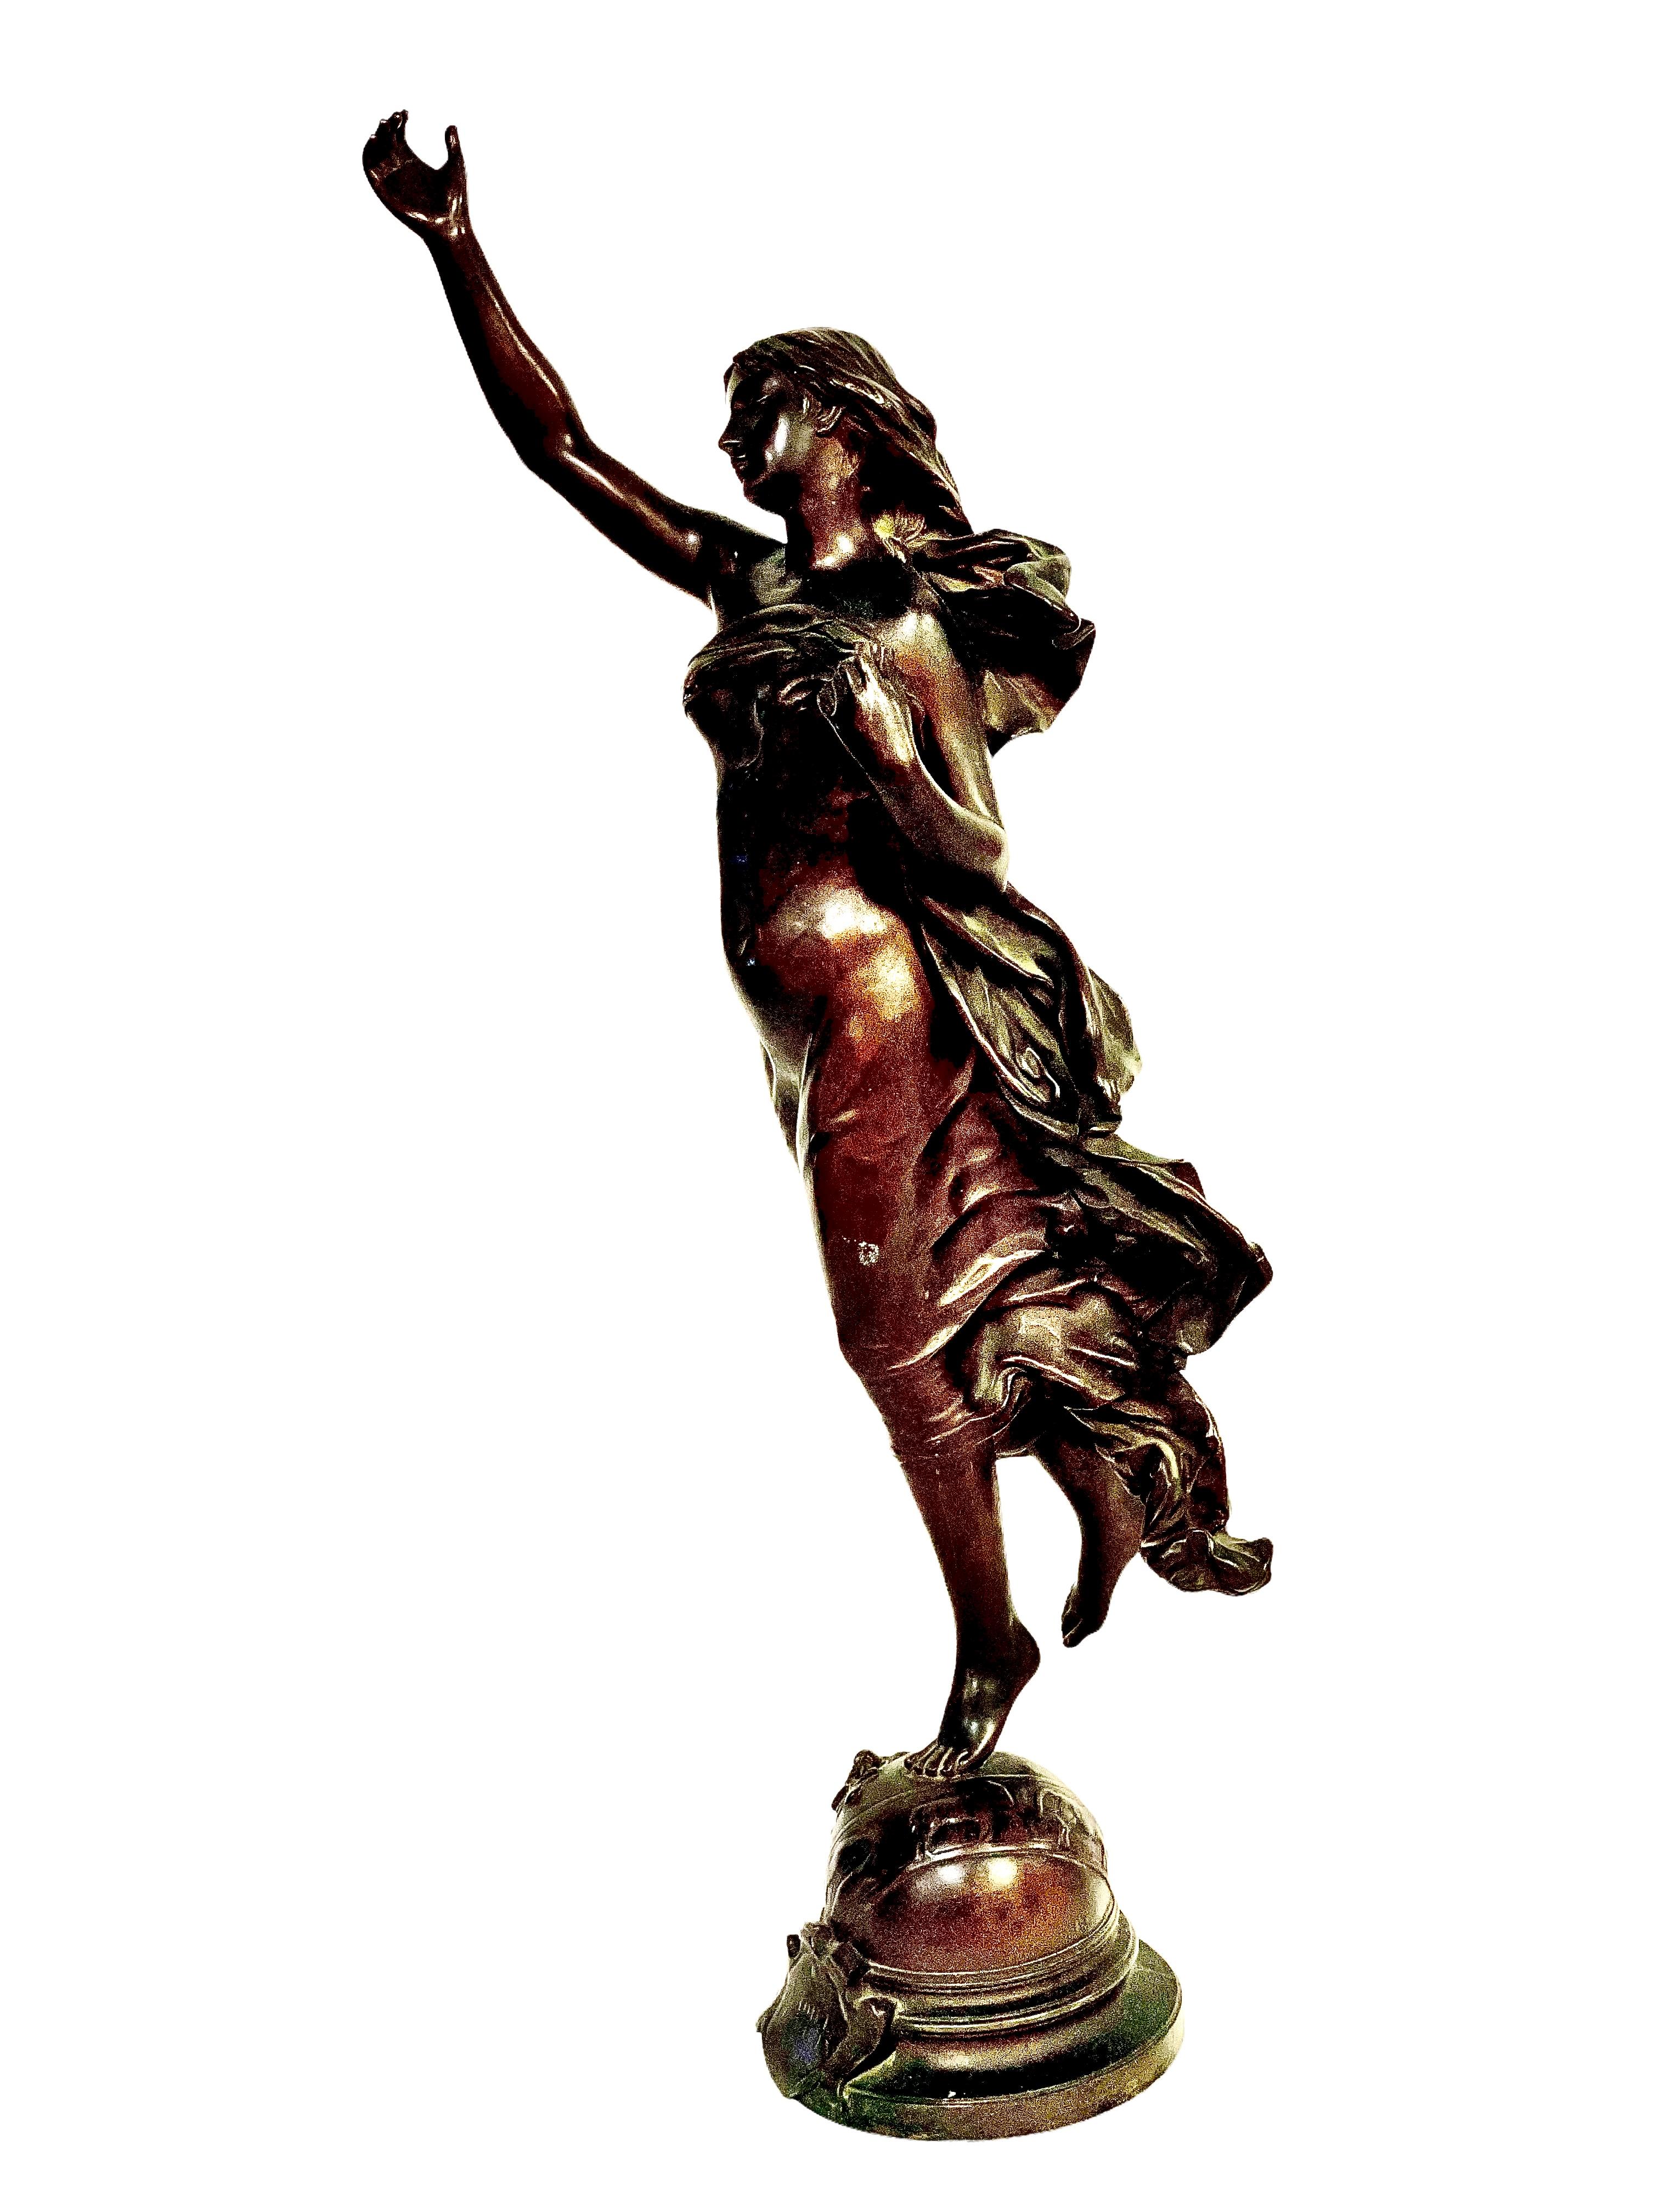 'L'Etoile du Matin', an Art Nouveau patinated bronze sculpture by renowned French sculptor Adrien Etienne Gaudez (1845 – 1902). This evocative piece depicts a mythological lady in flowing robes holding aloft a star (now sadly missing), with one foot